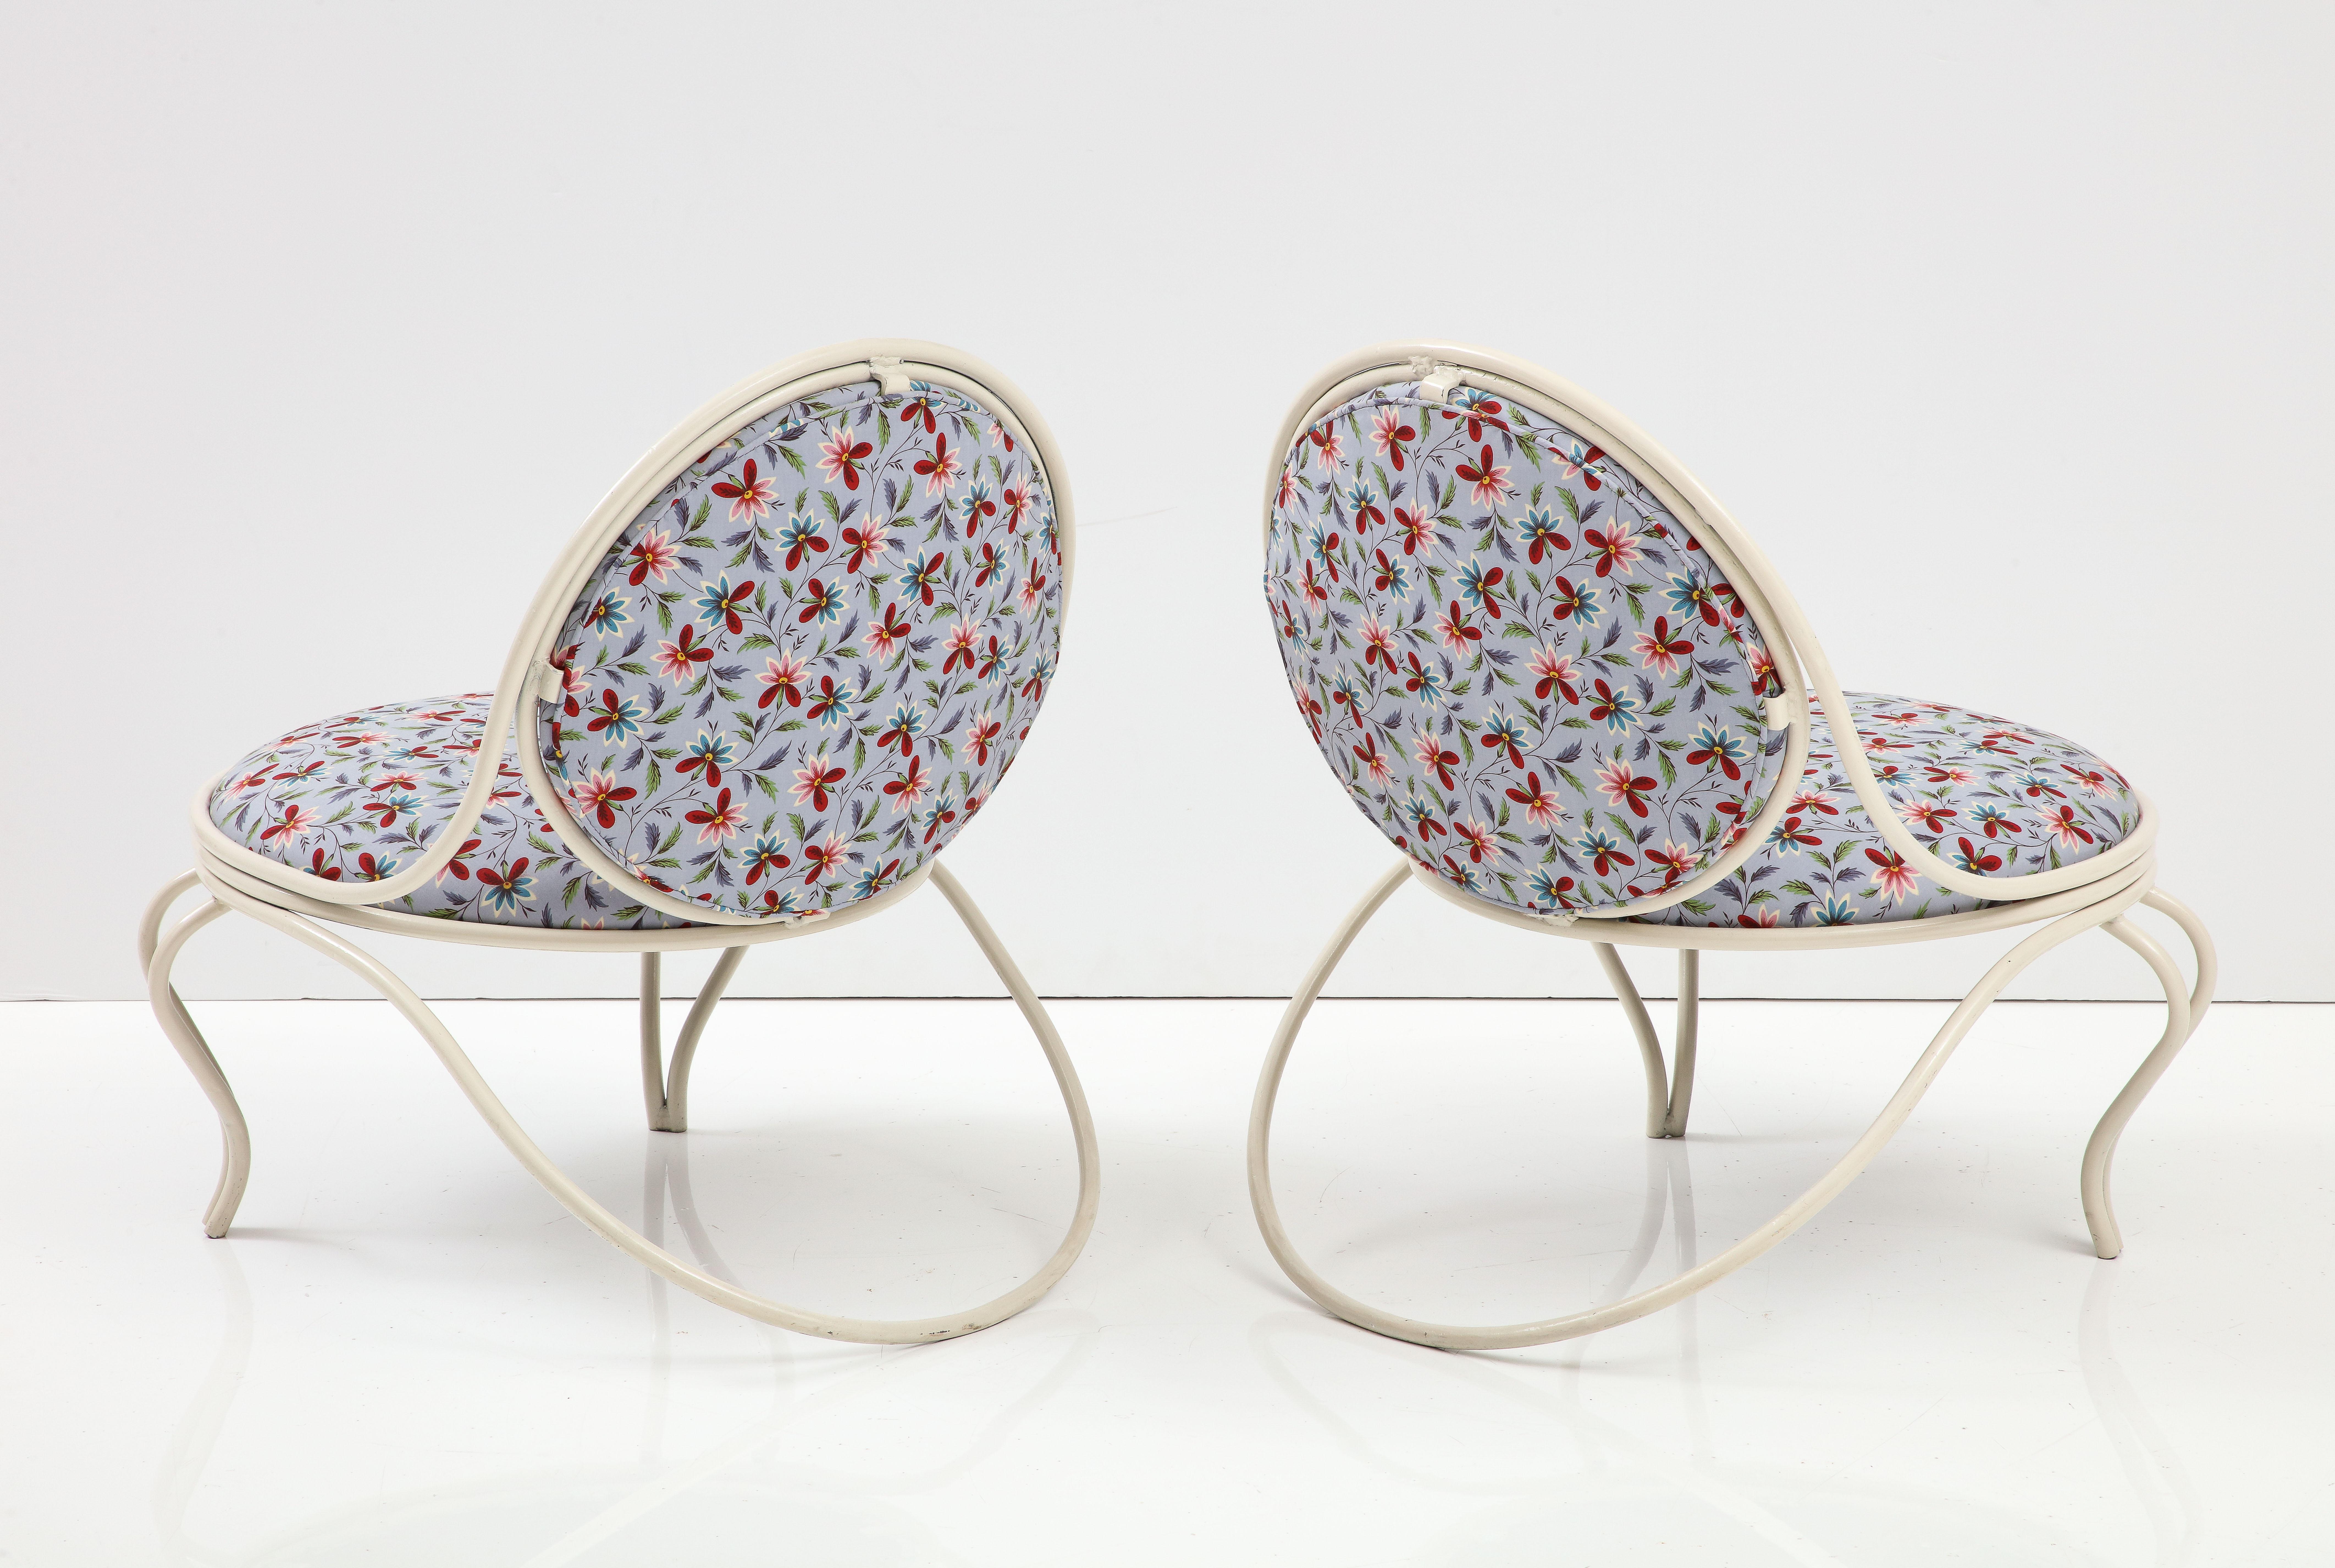 Pair of lounge chairs by Mathieu Matégot, France, mid-20th century. 

Newly Reupholstered in a Playful Floral Print from John Rosselli.